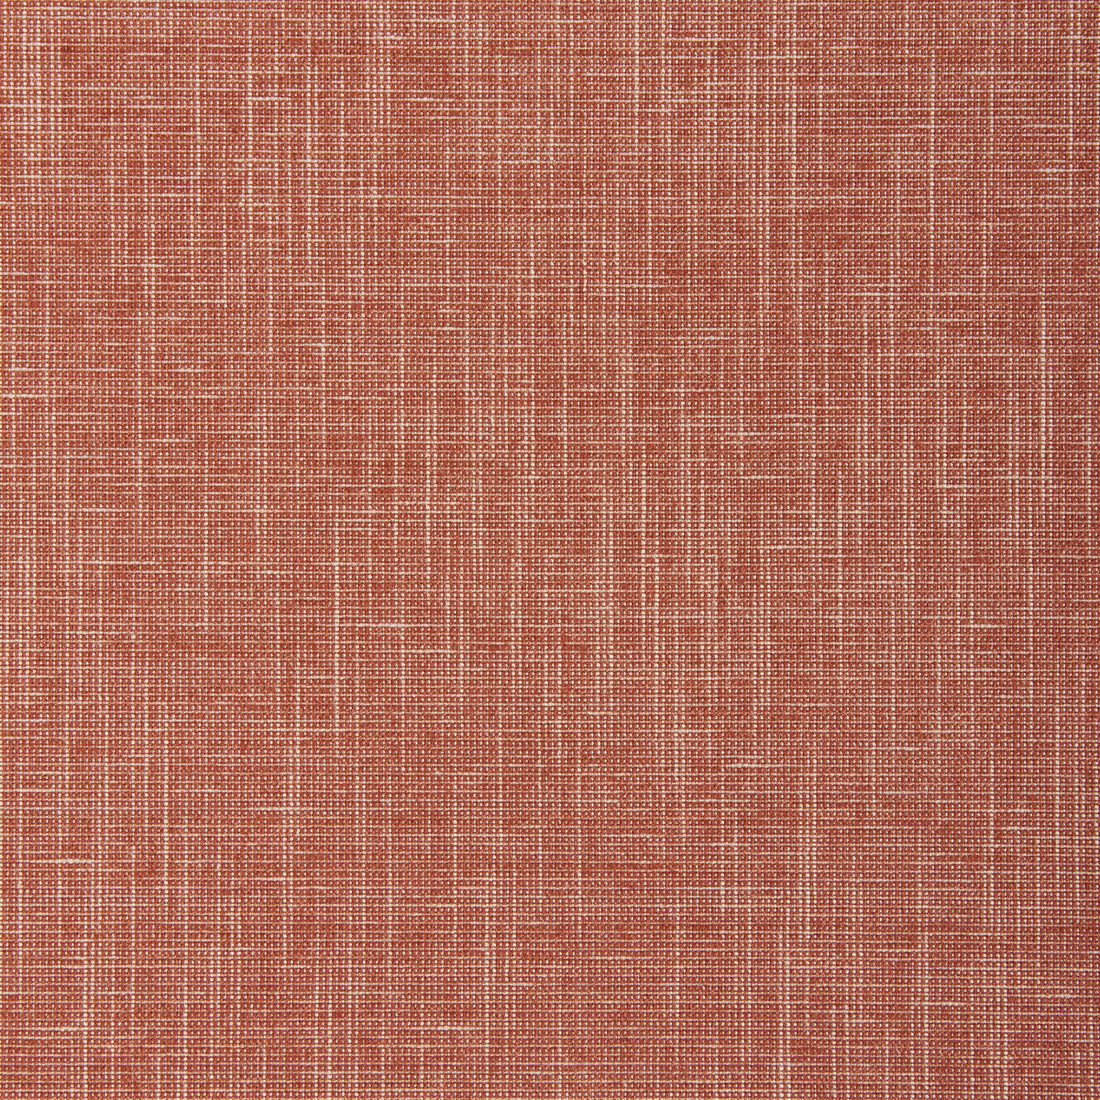 Kravet Smart fabric in 37078-119 color - pattern 37078.119.0 - by Kravet Smart in the Trio Textures collection